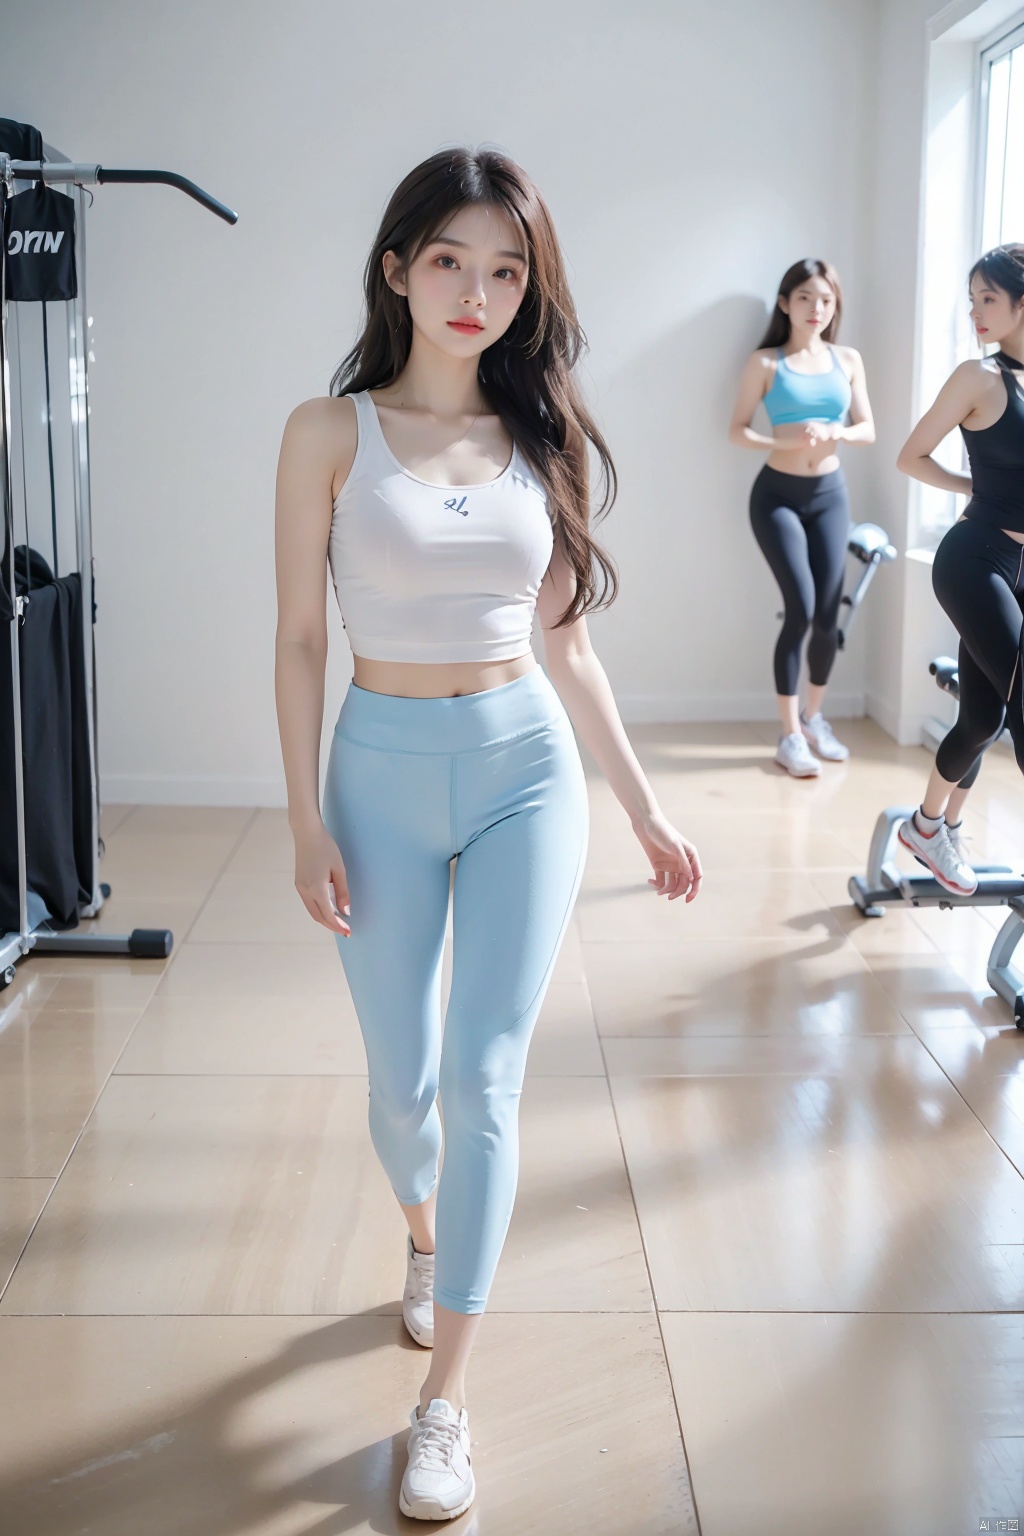  Masterpiece, a beautiful woman with slim figure, peerless appearance, long brown hair, wearing a white suspender skirt and light blue fitness pants, exercising in the gym, full body portrait, natural lighting, high quality, high details, (\shuang hua\)